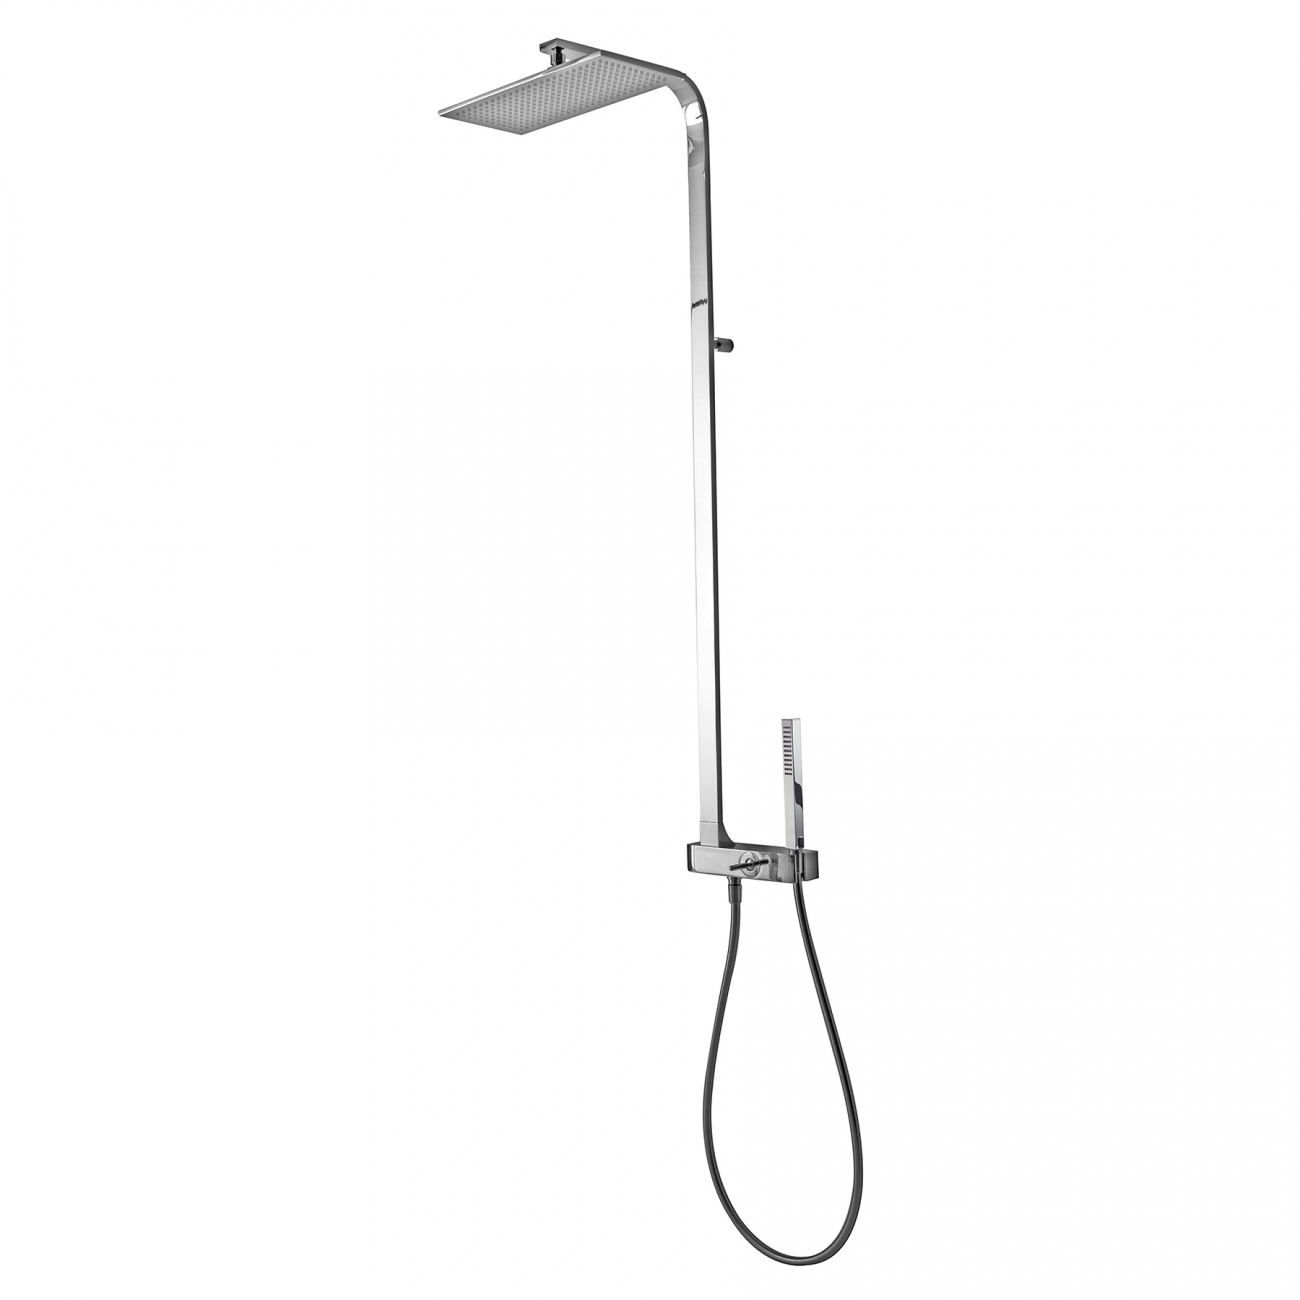 Treemme Arché wall-mounted shower column